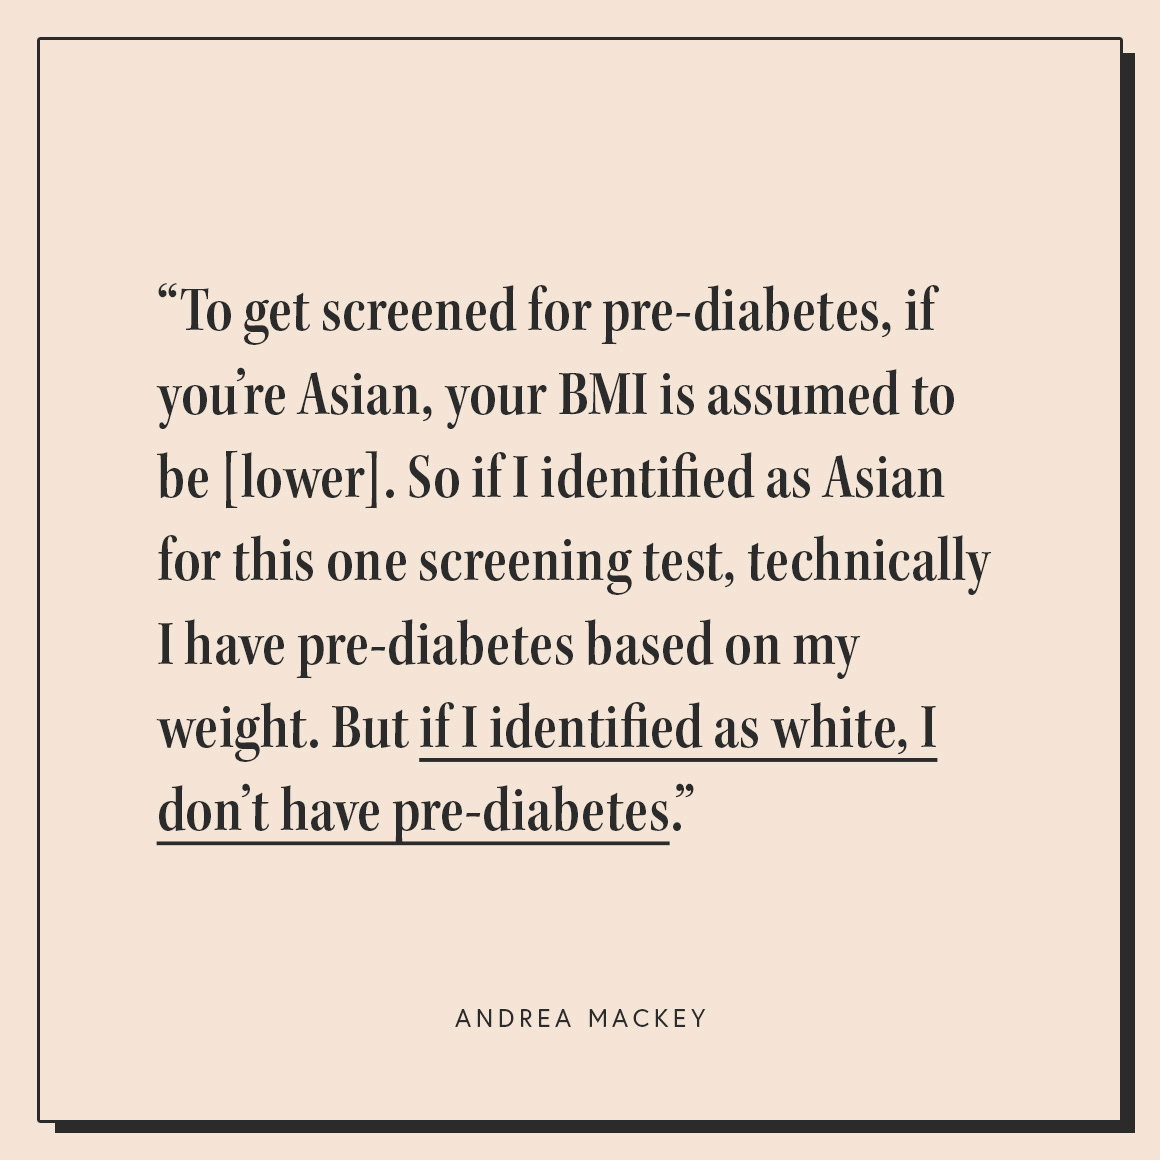 To get screen for pre-diabetes, if you're Asian, your BMI is assumed to be lower. So if I identified as Asian for this one screening test, technically I have pre-diabetes based on my weight. But if I identified as white, I don't have pre-diabetes."